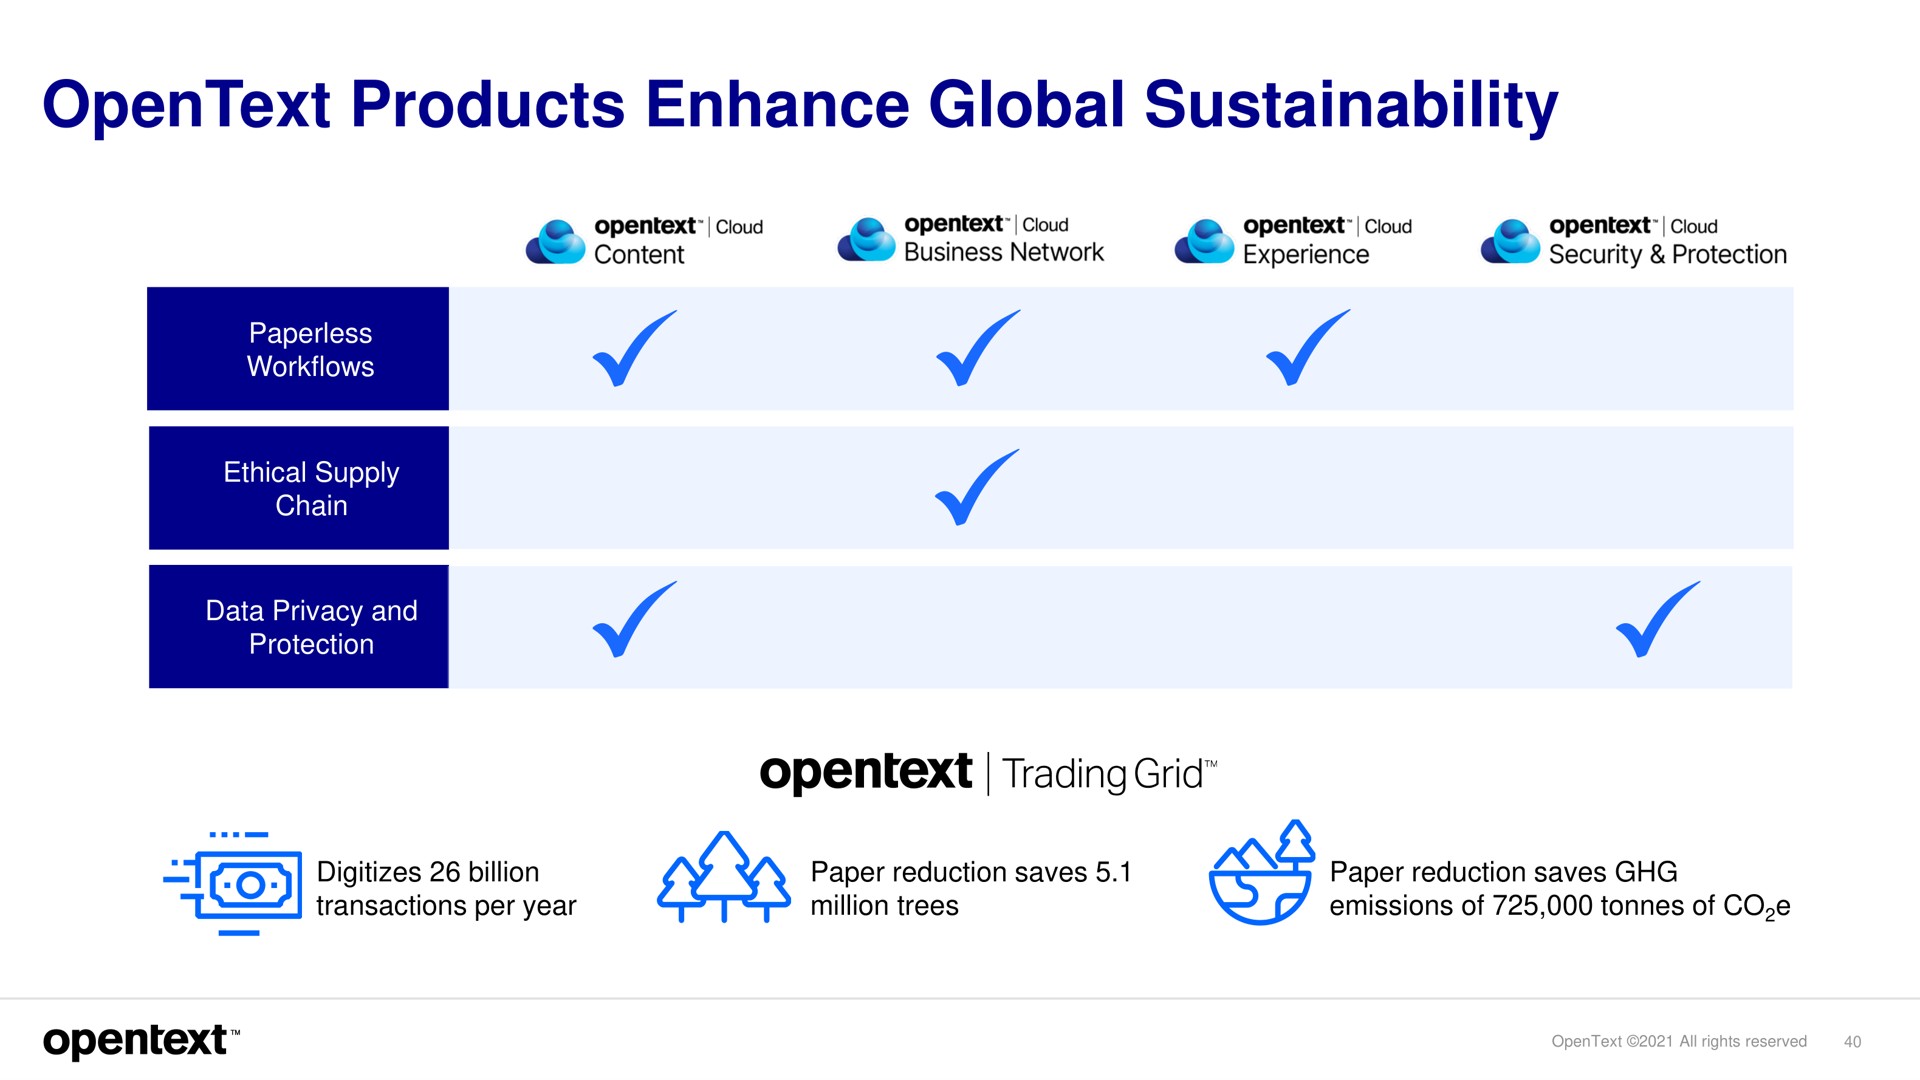 products enhance global trading grid | OpenText